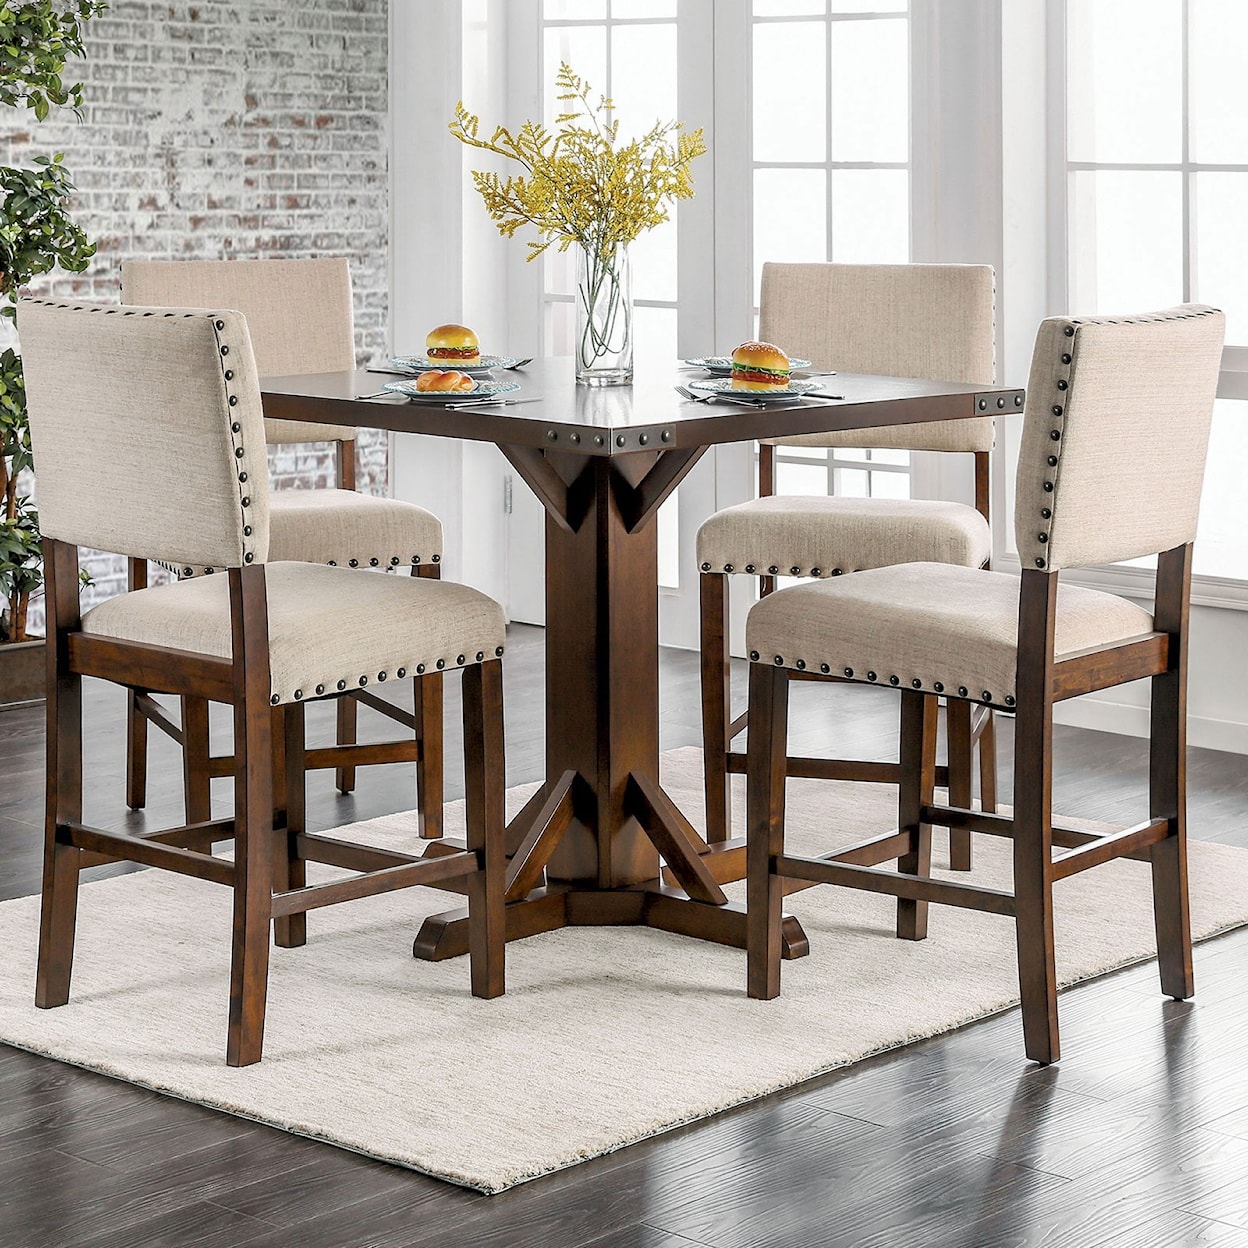 Furniture of America Glenbrook Table + 4 Counter Ht. Chairs